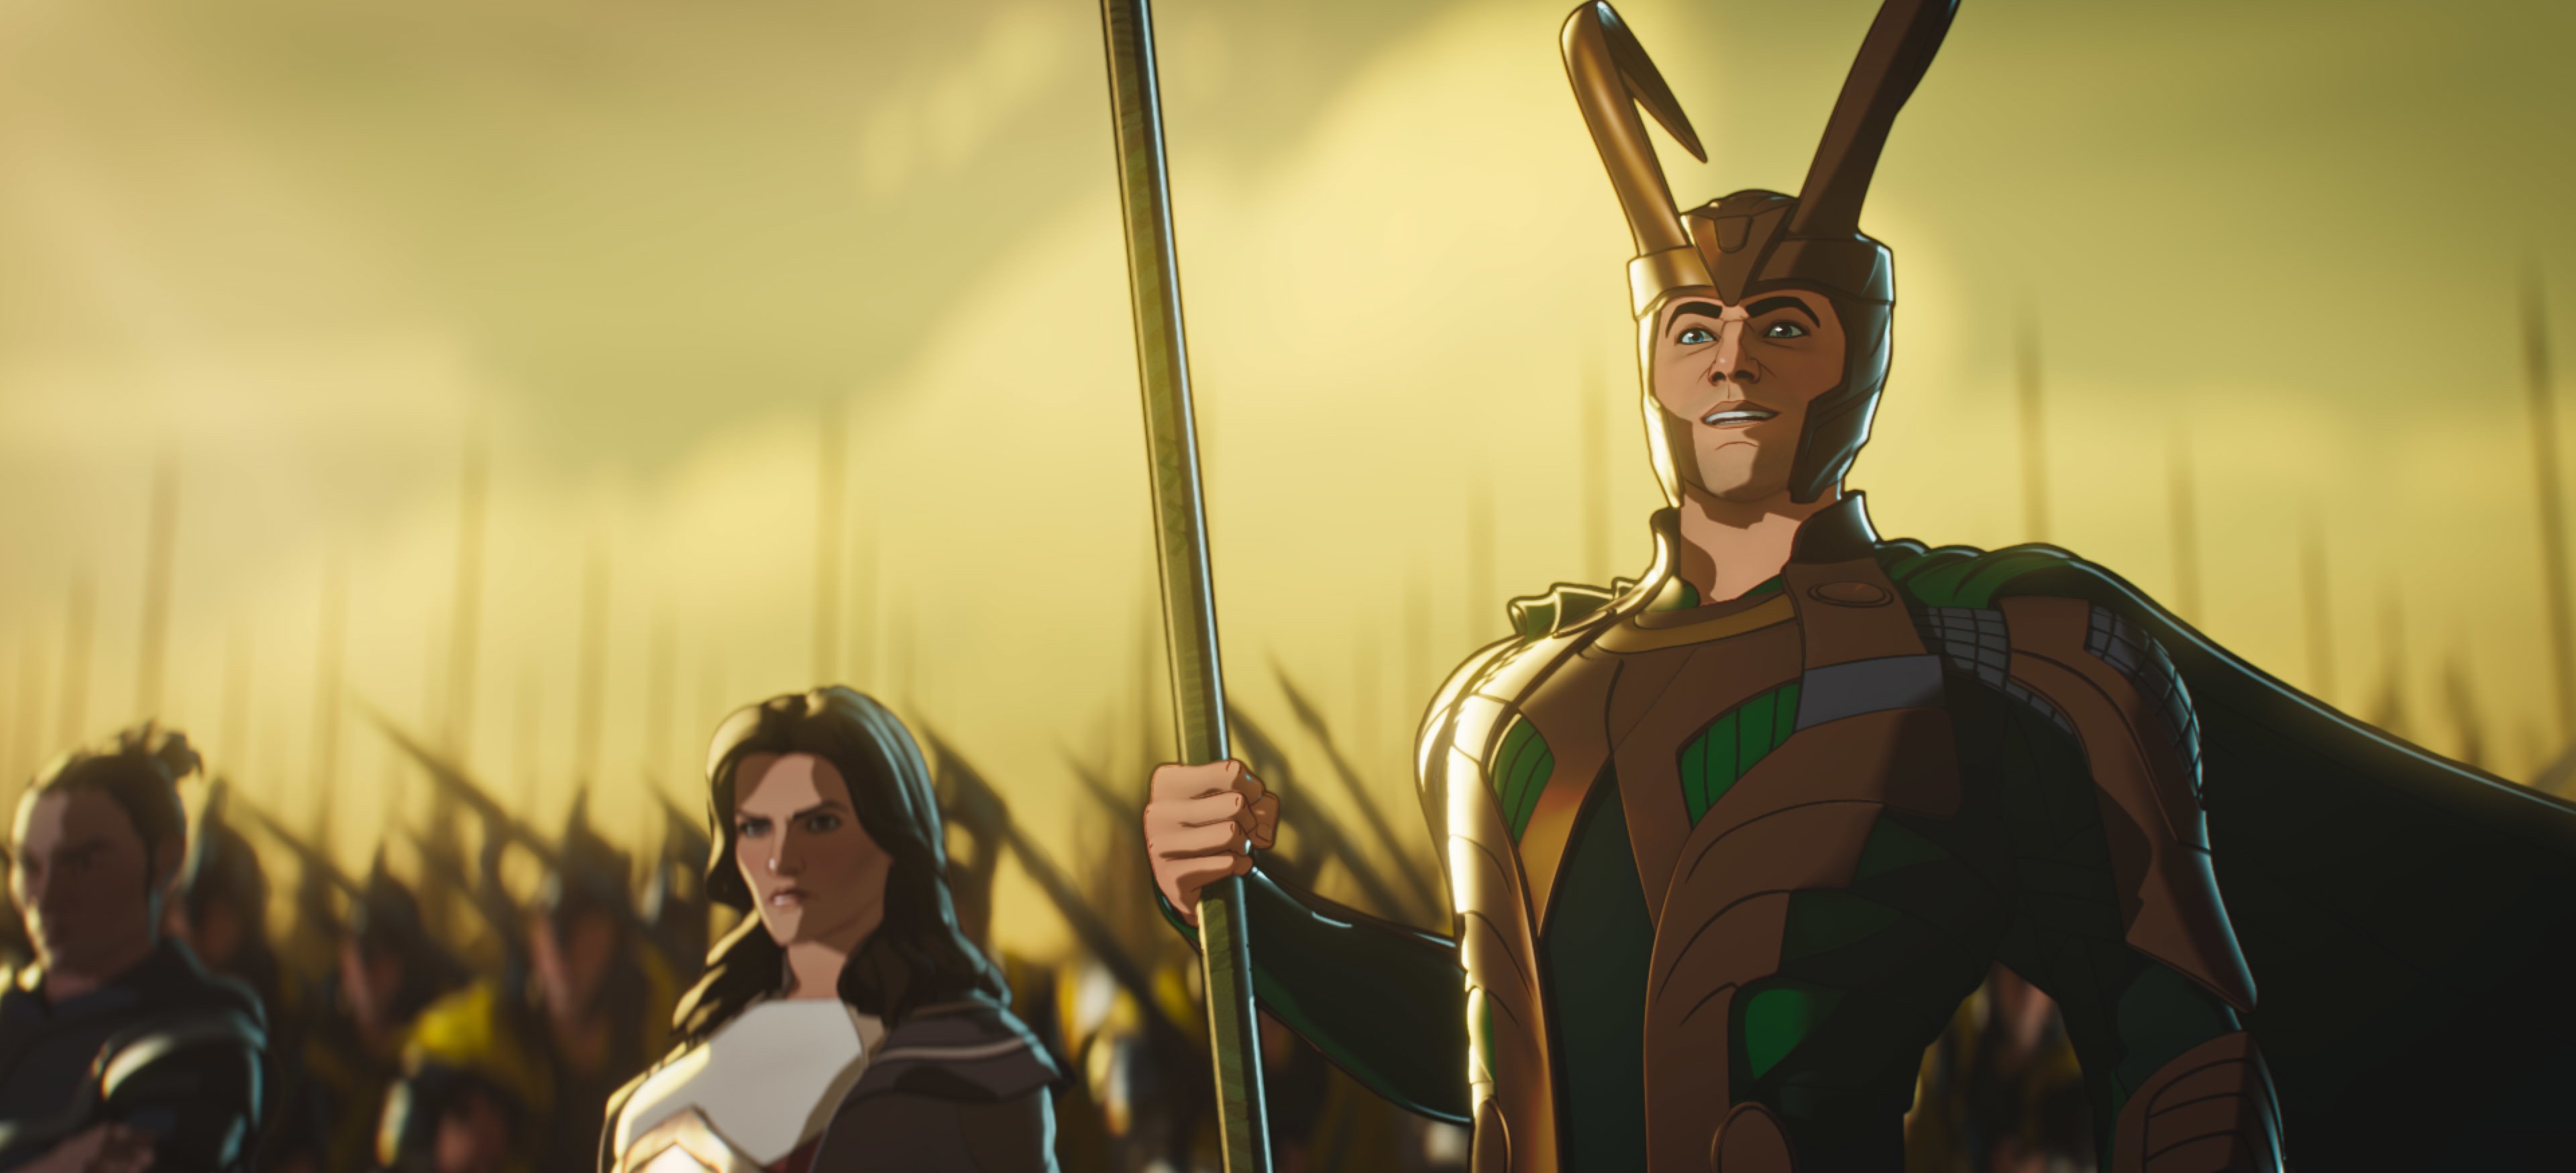 Loki and Lady Sif prepare for battle in What If